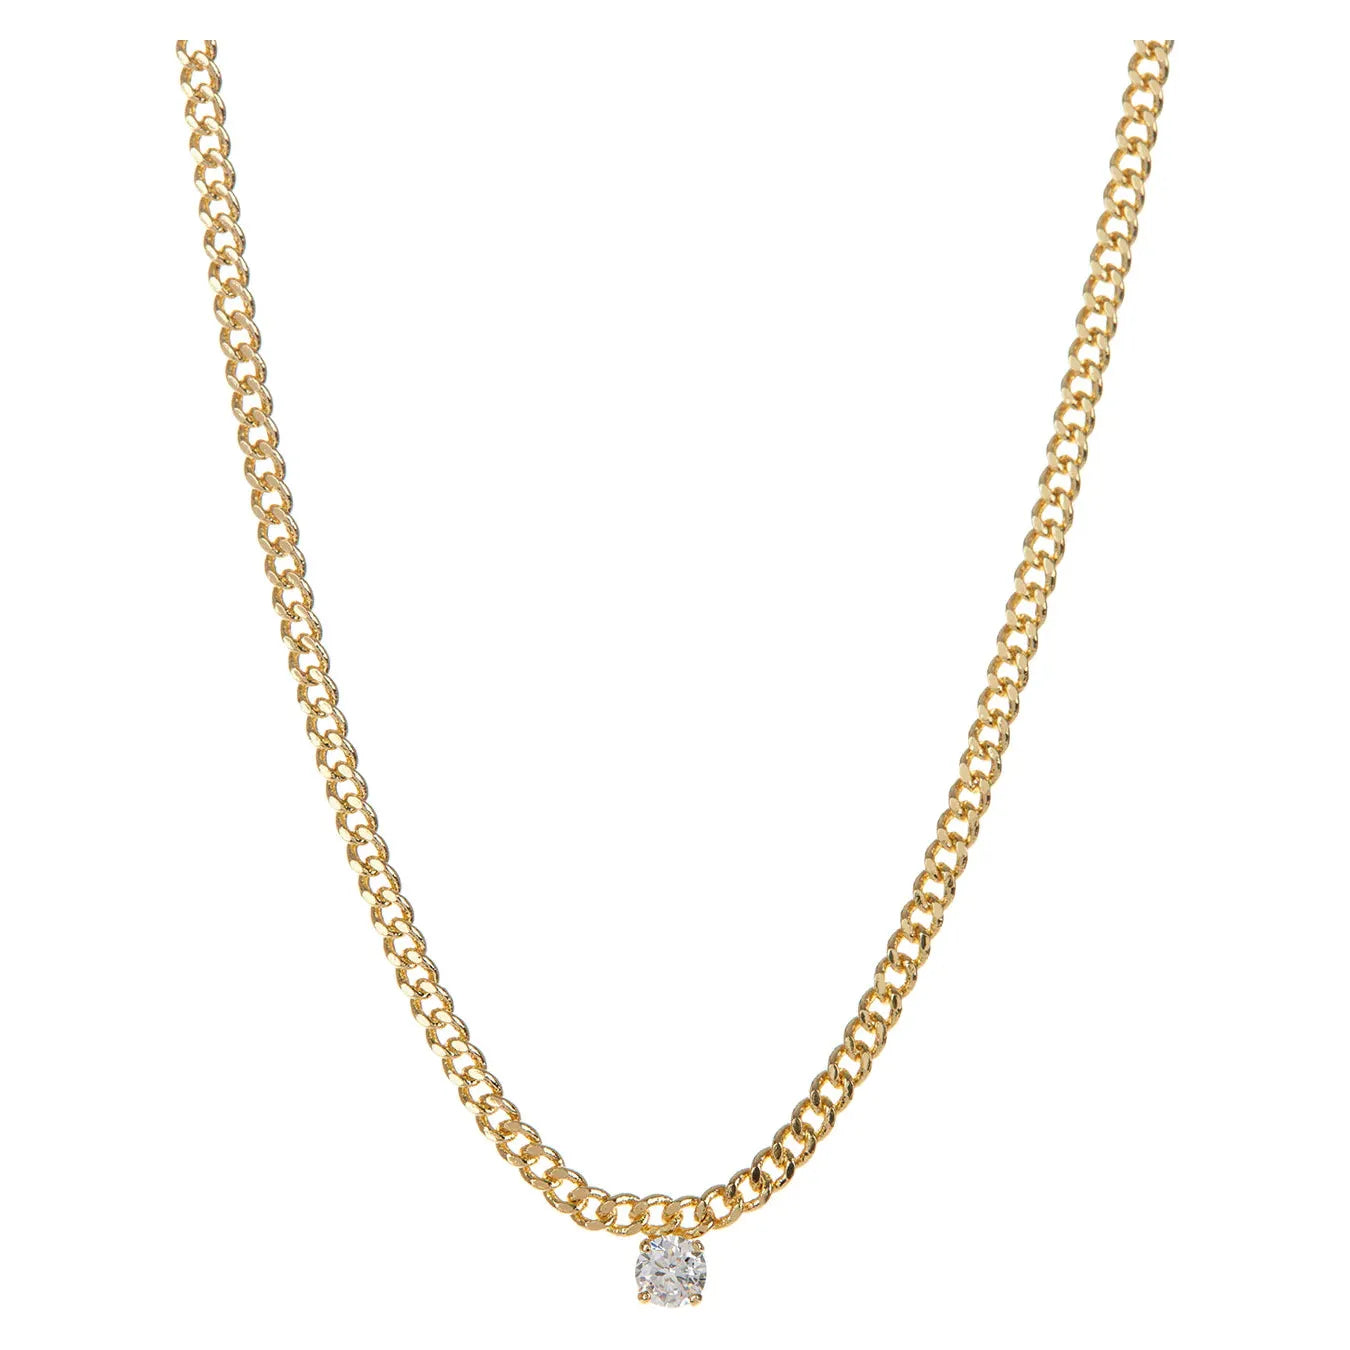 LUV AJ - Bardot Stud Charm Necklace in Gold